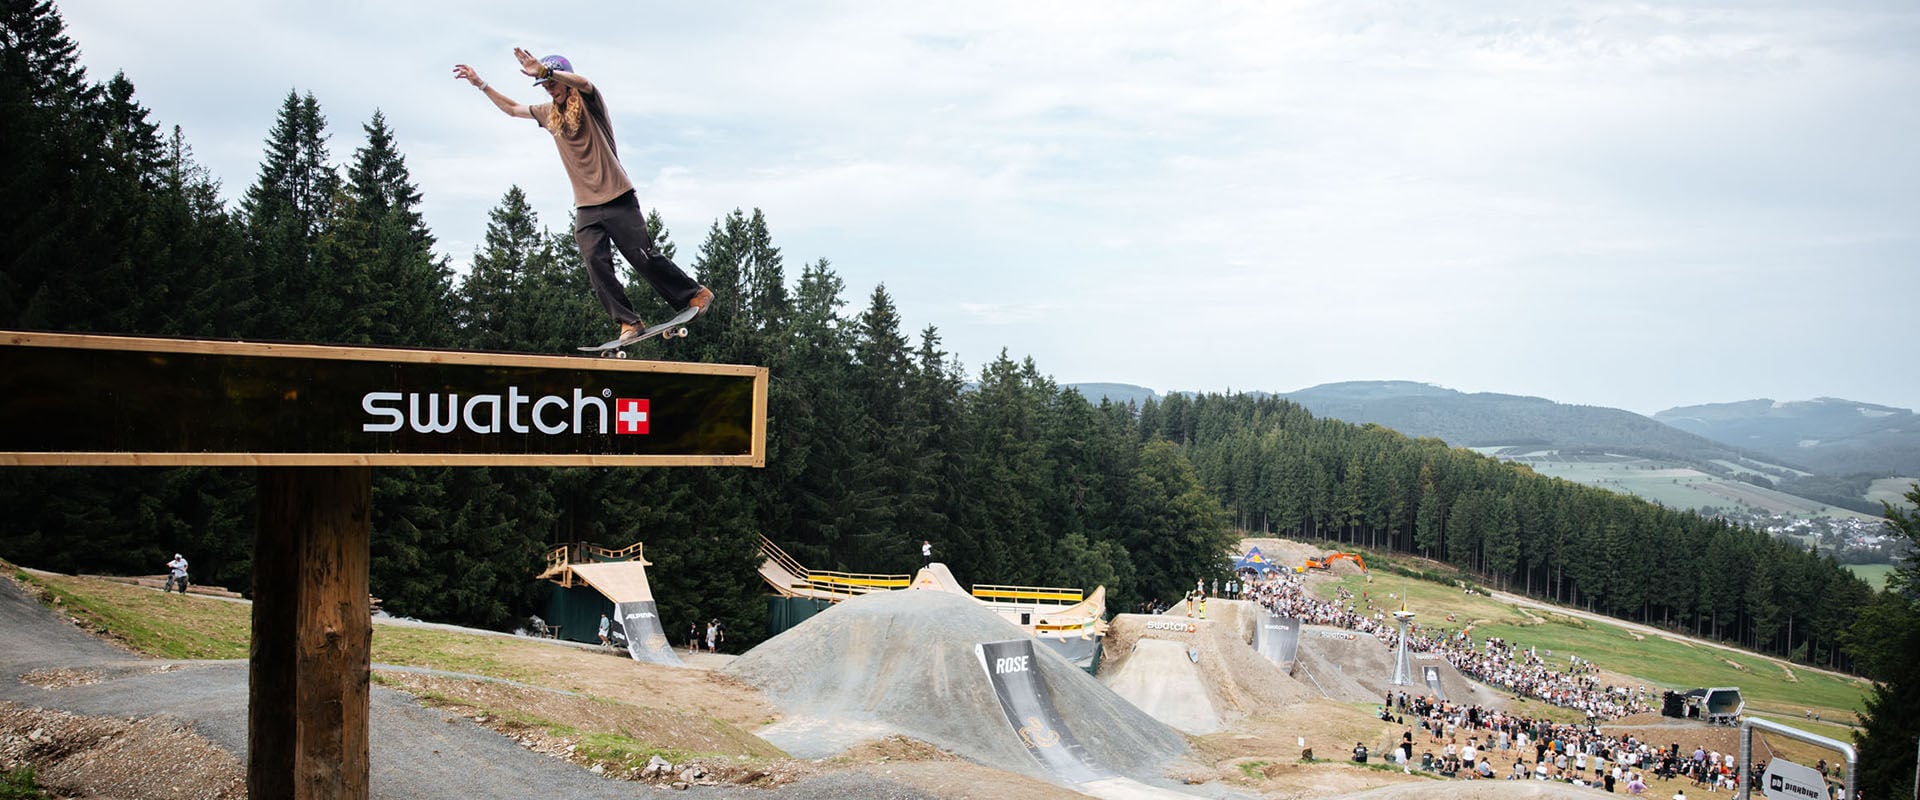 Andy Anderson skateboarding at the top of Swatch Nines